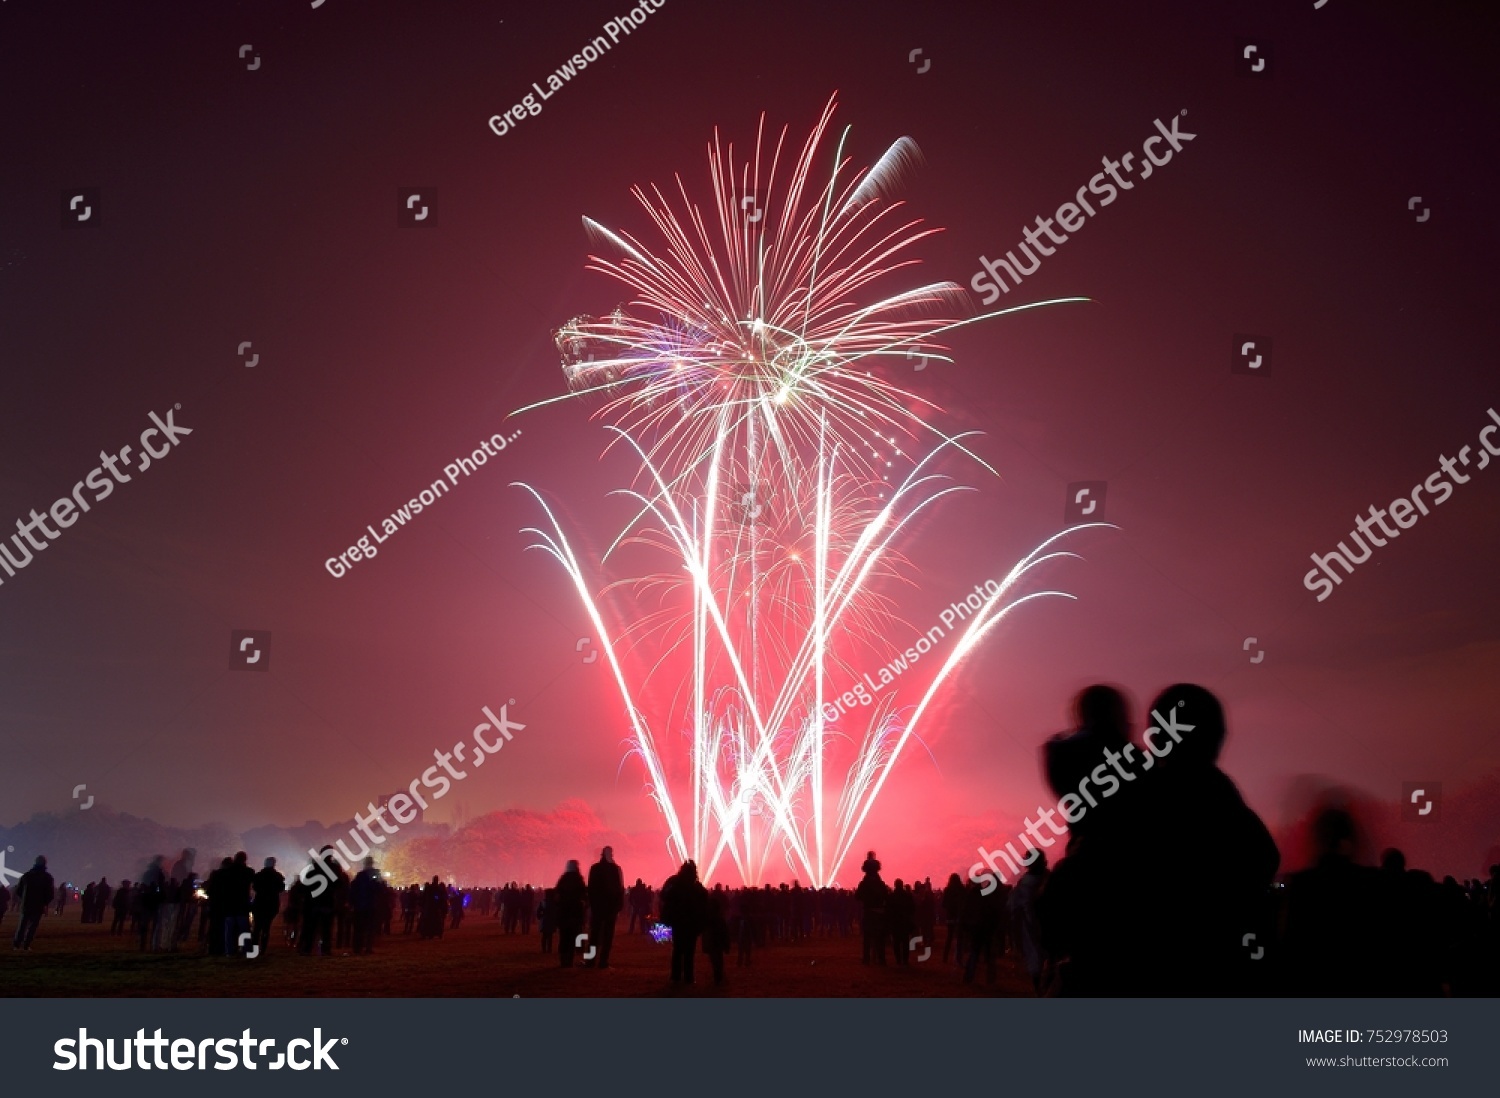 Bonfire night celebrations with a fireworks show at Sefton Park, Liverpool, UK. On 5th November #752978503